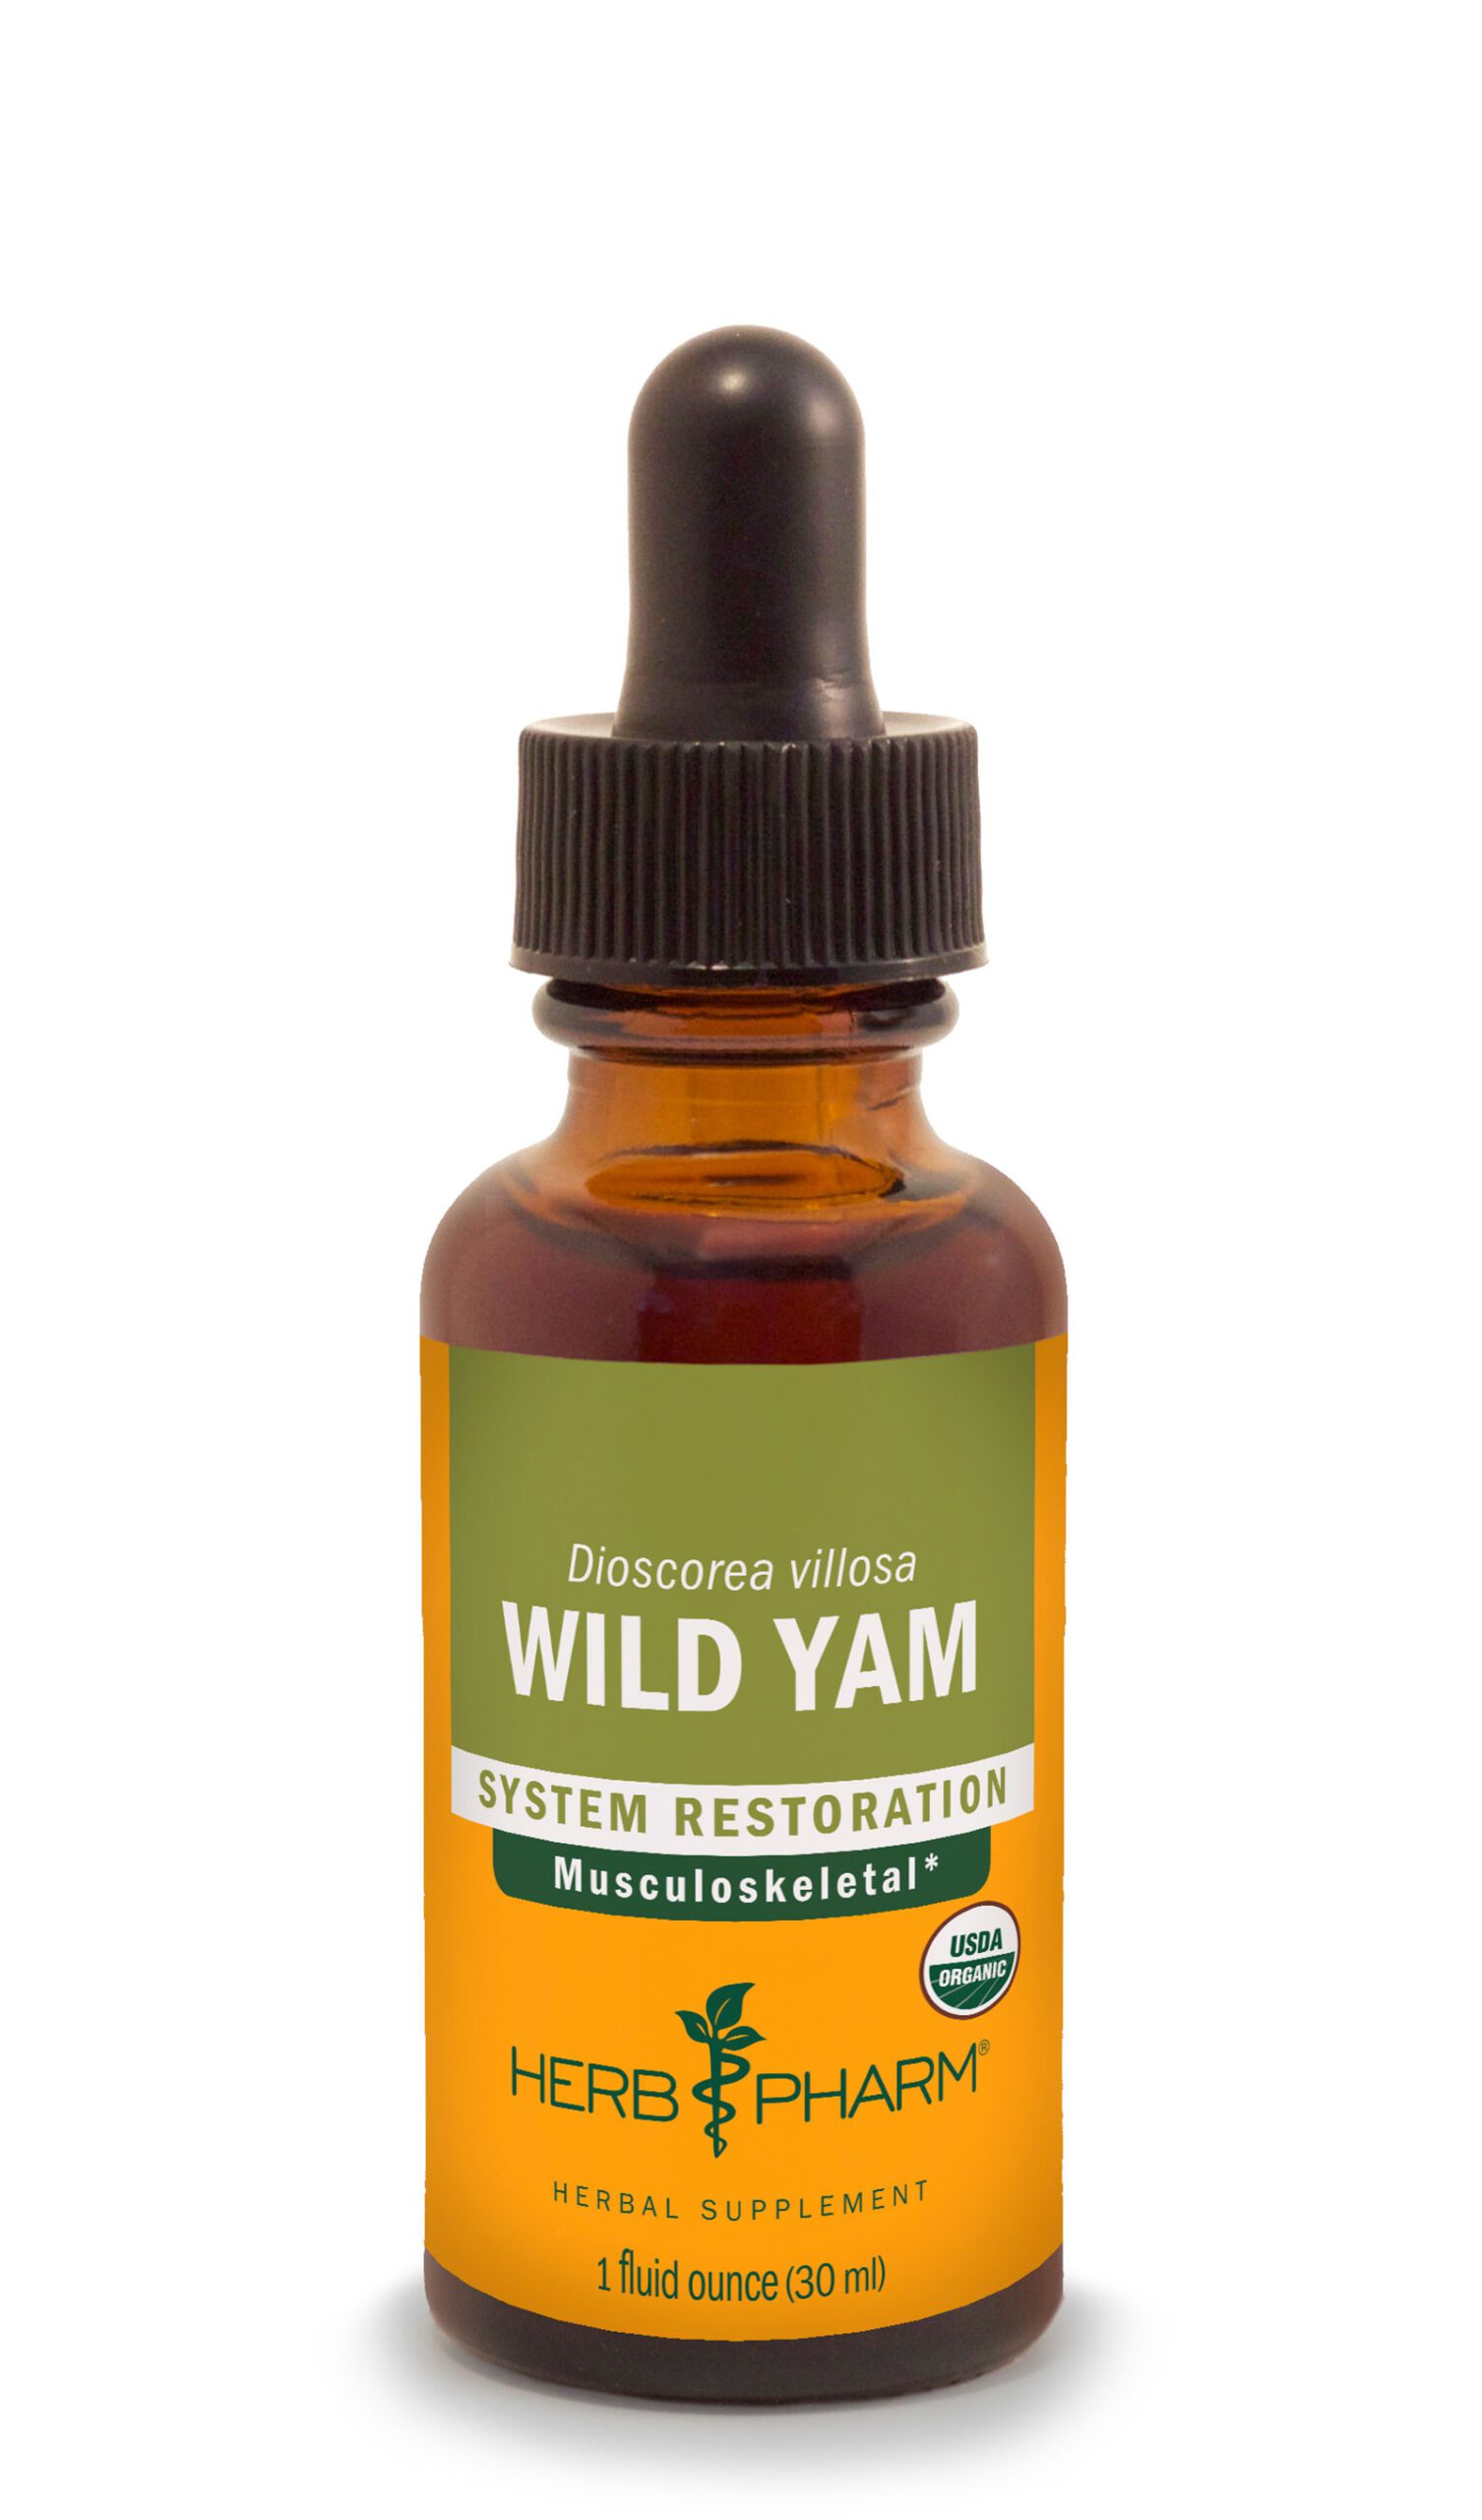 Product Listing Image for Herb Pharm Wild Yam Tincture 1oz